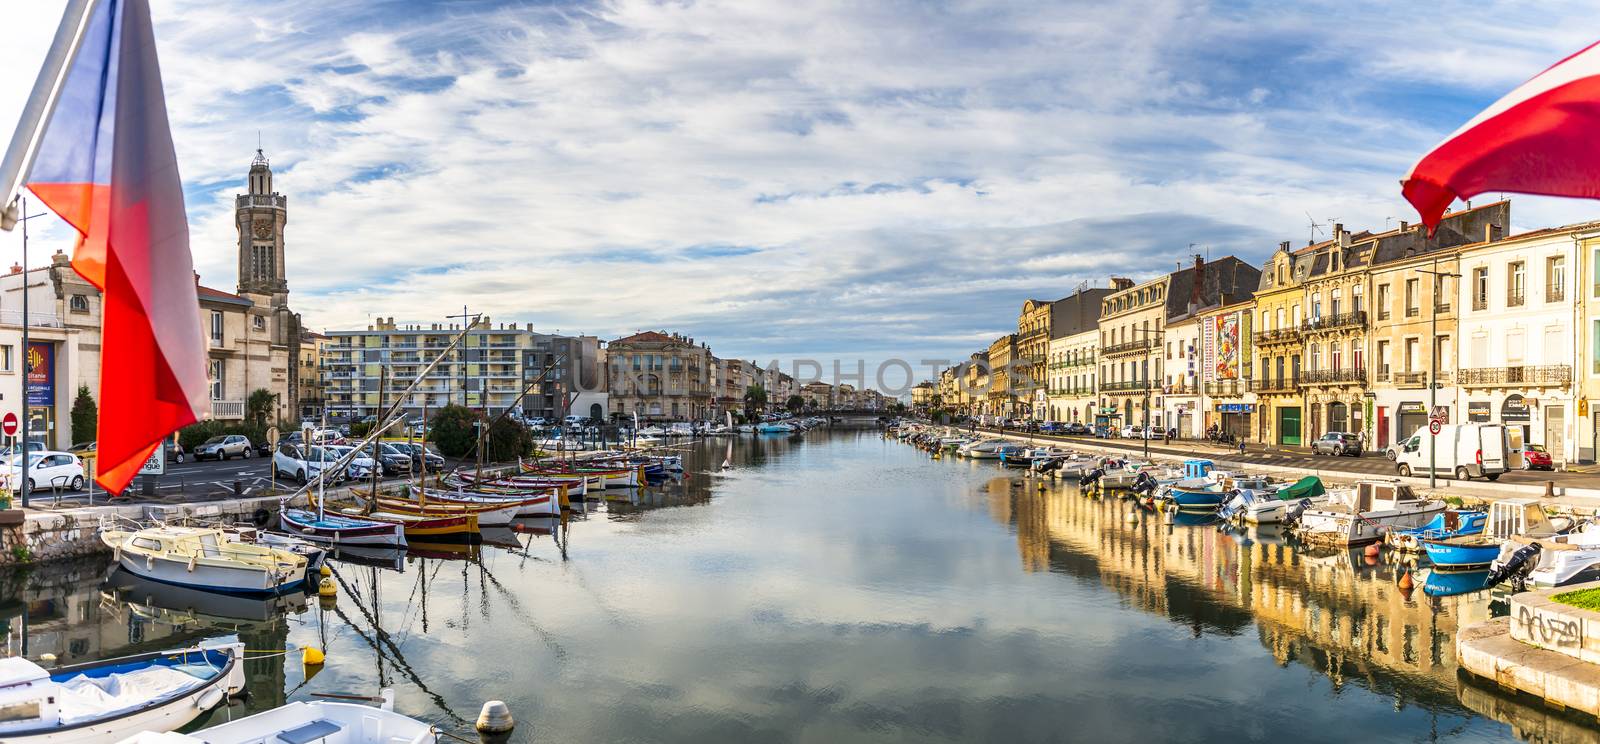 Sète is an important port city in the south-east of France, located in Occitanie. It is bordered by the Thau lagoon, a saltwater lagoon which is home to various animal species.